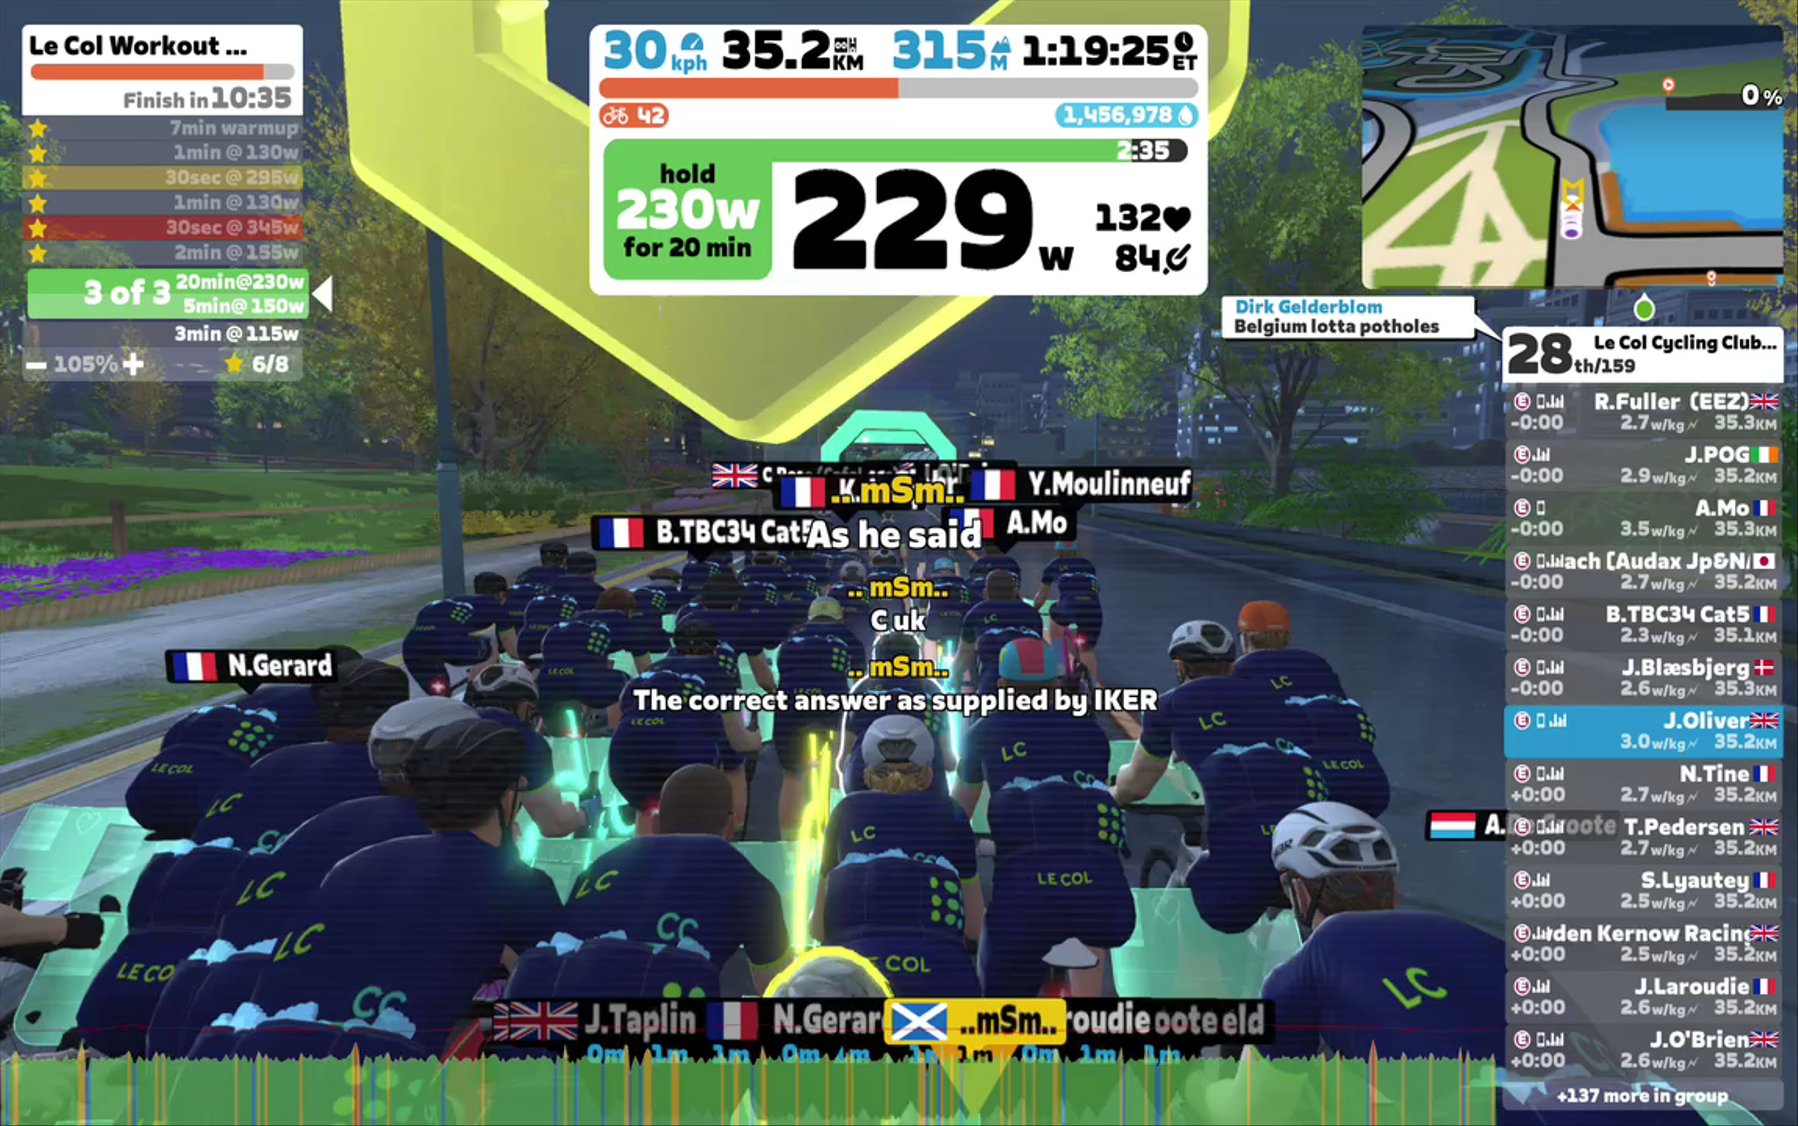 Zwift - Group Workout: Le Col Cycling Club Community WN40 (E) on Chasing the Sun in Makuri Islands